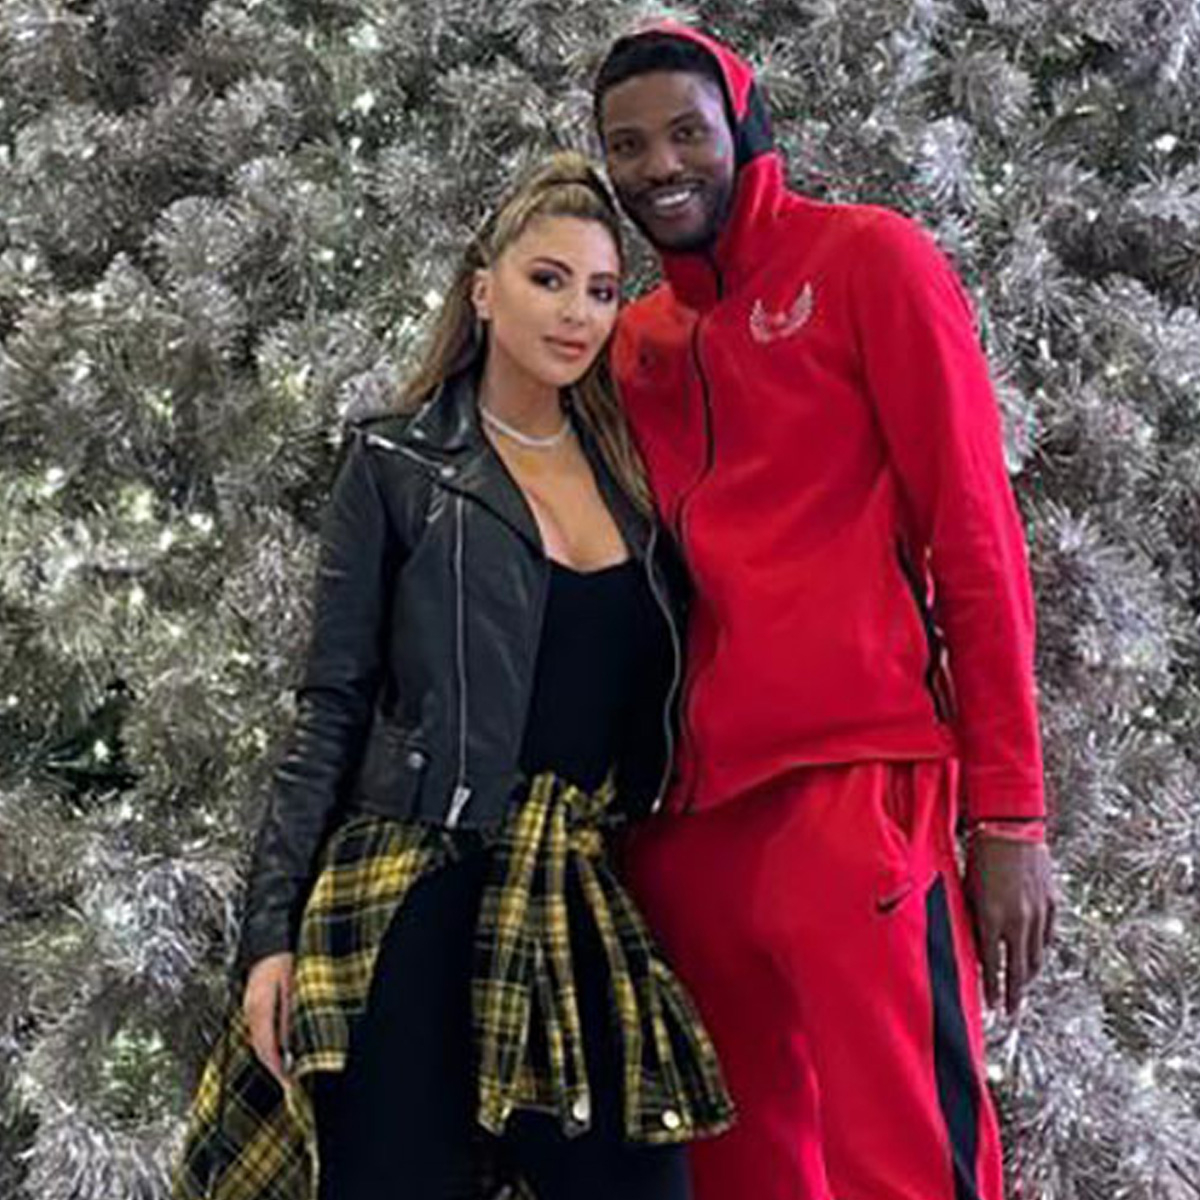 Larsa Pippen said that Malik Beasley was separated from the woman when they met